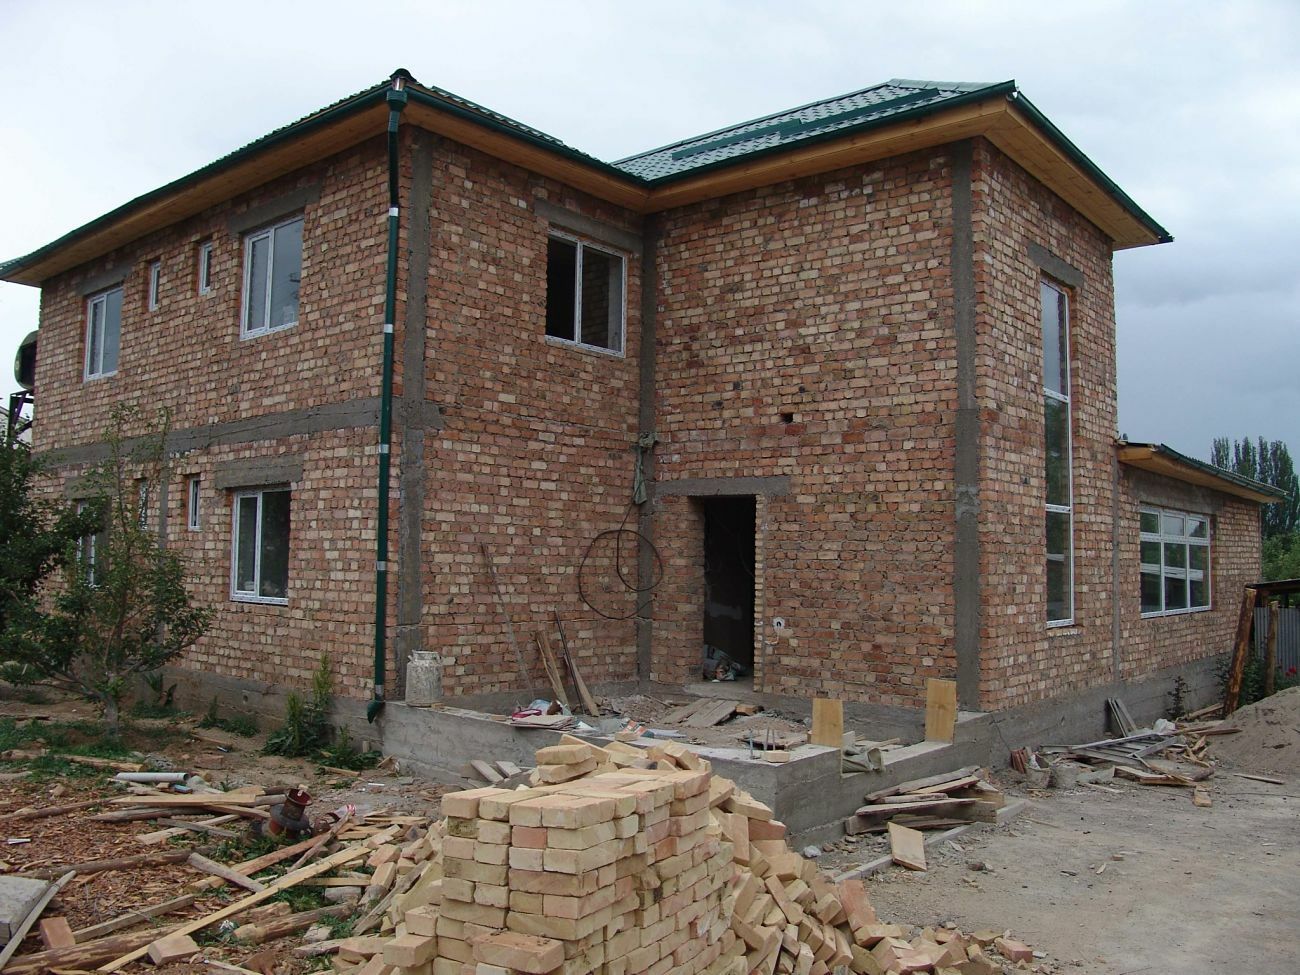 Competition in Karakol started to grow and it was decided to make big project through constructing new building with 8 bed rooms with own WC and shower in 2008.  